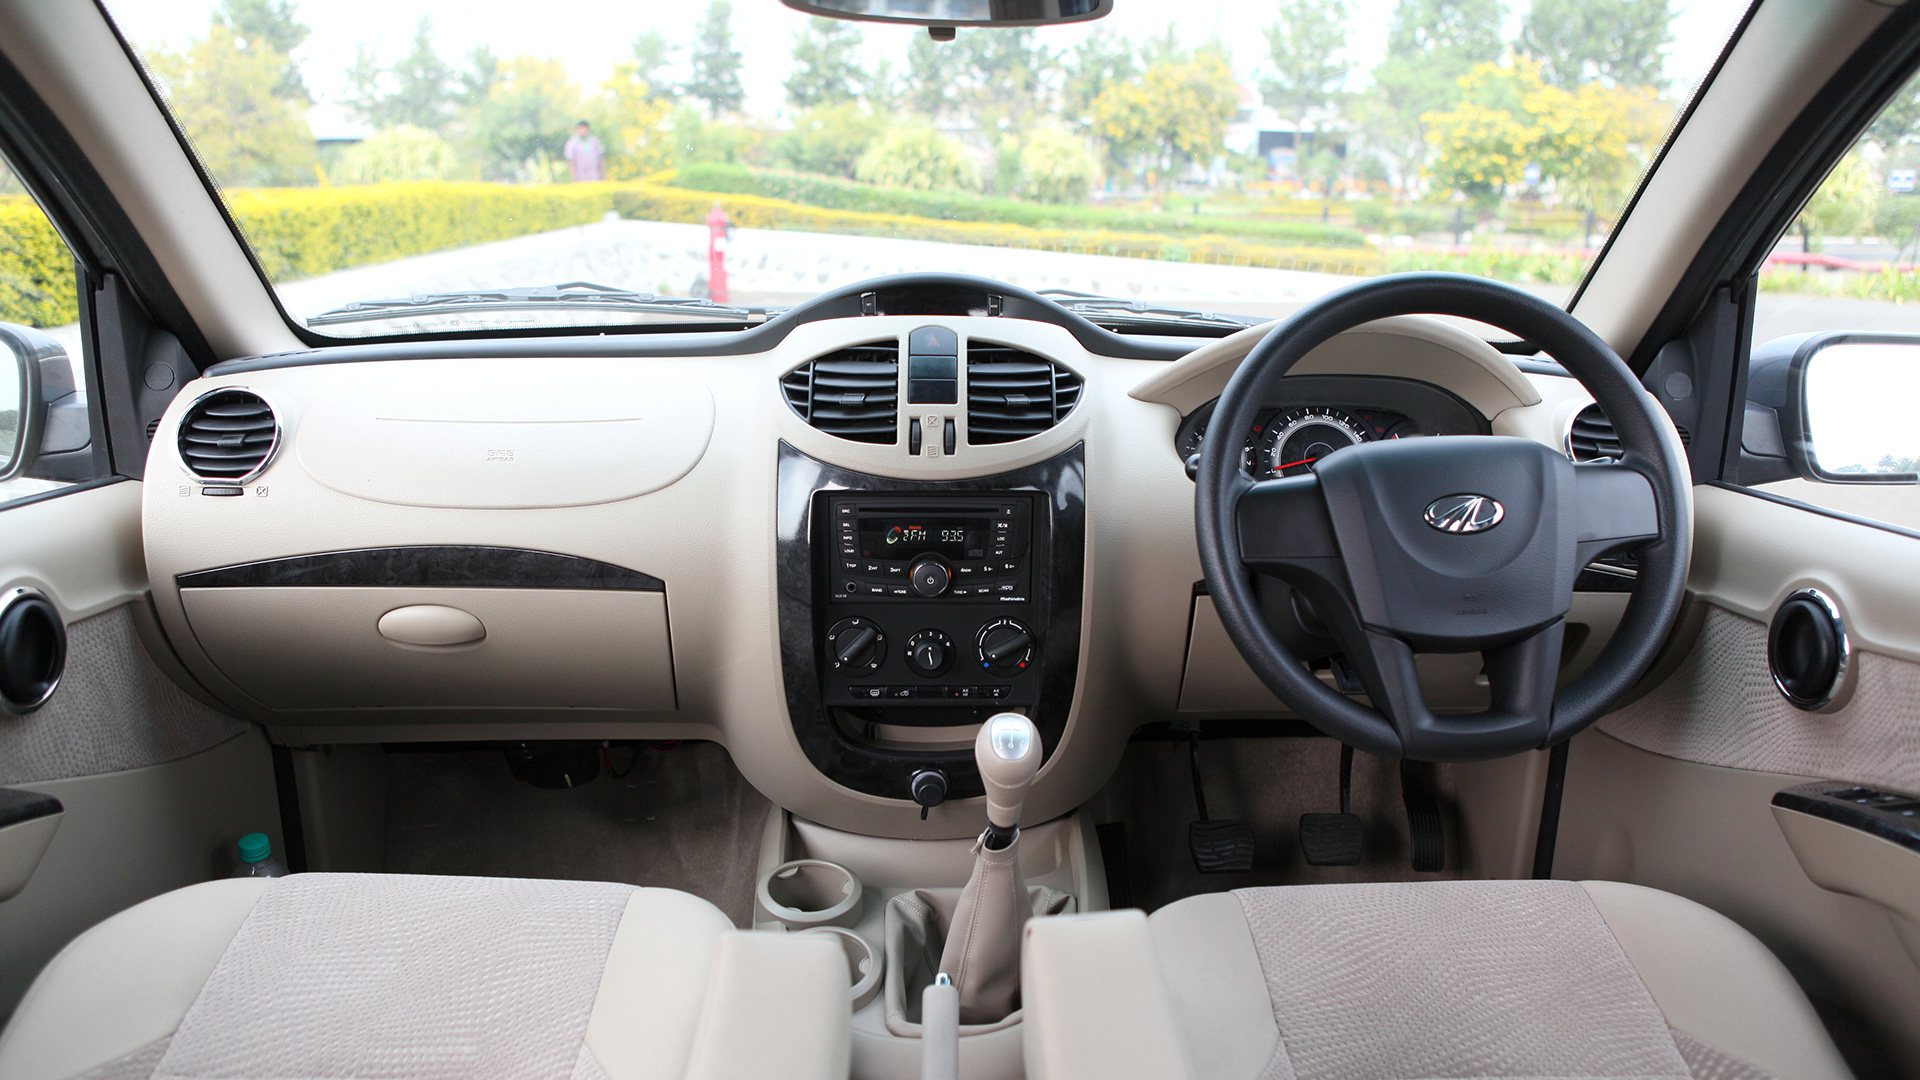 Mahindra Xylo for Rent in Kashmir